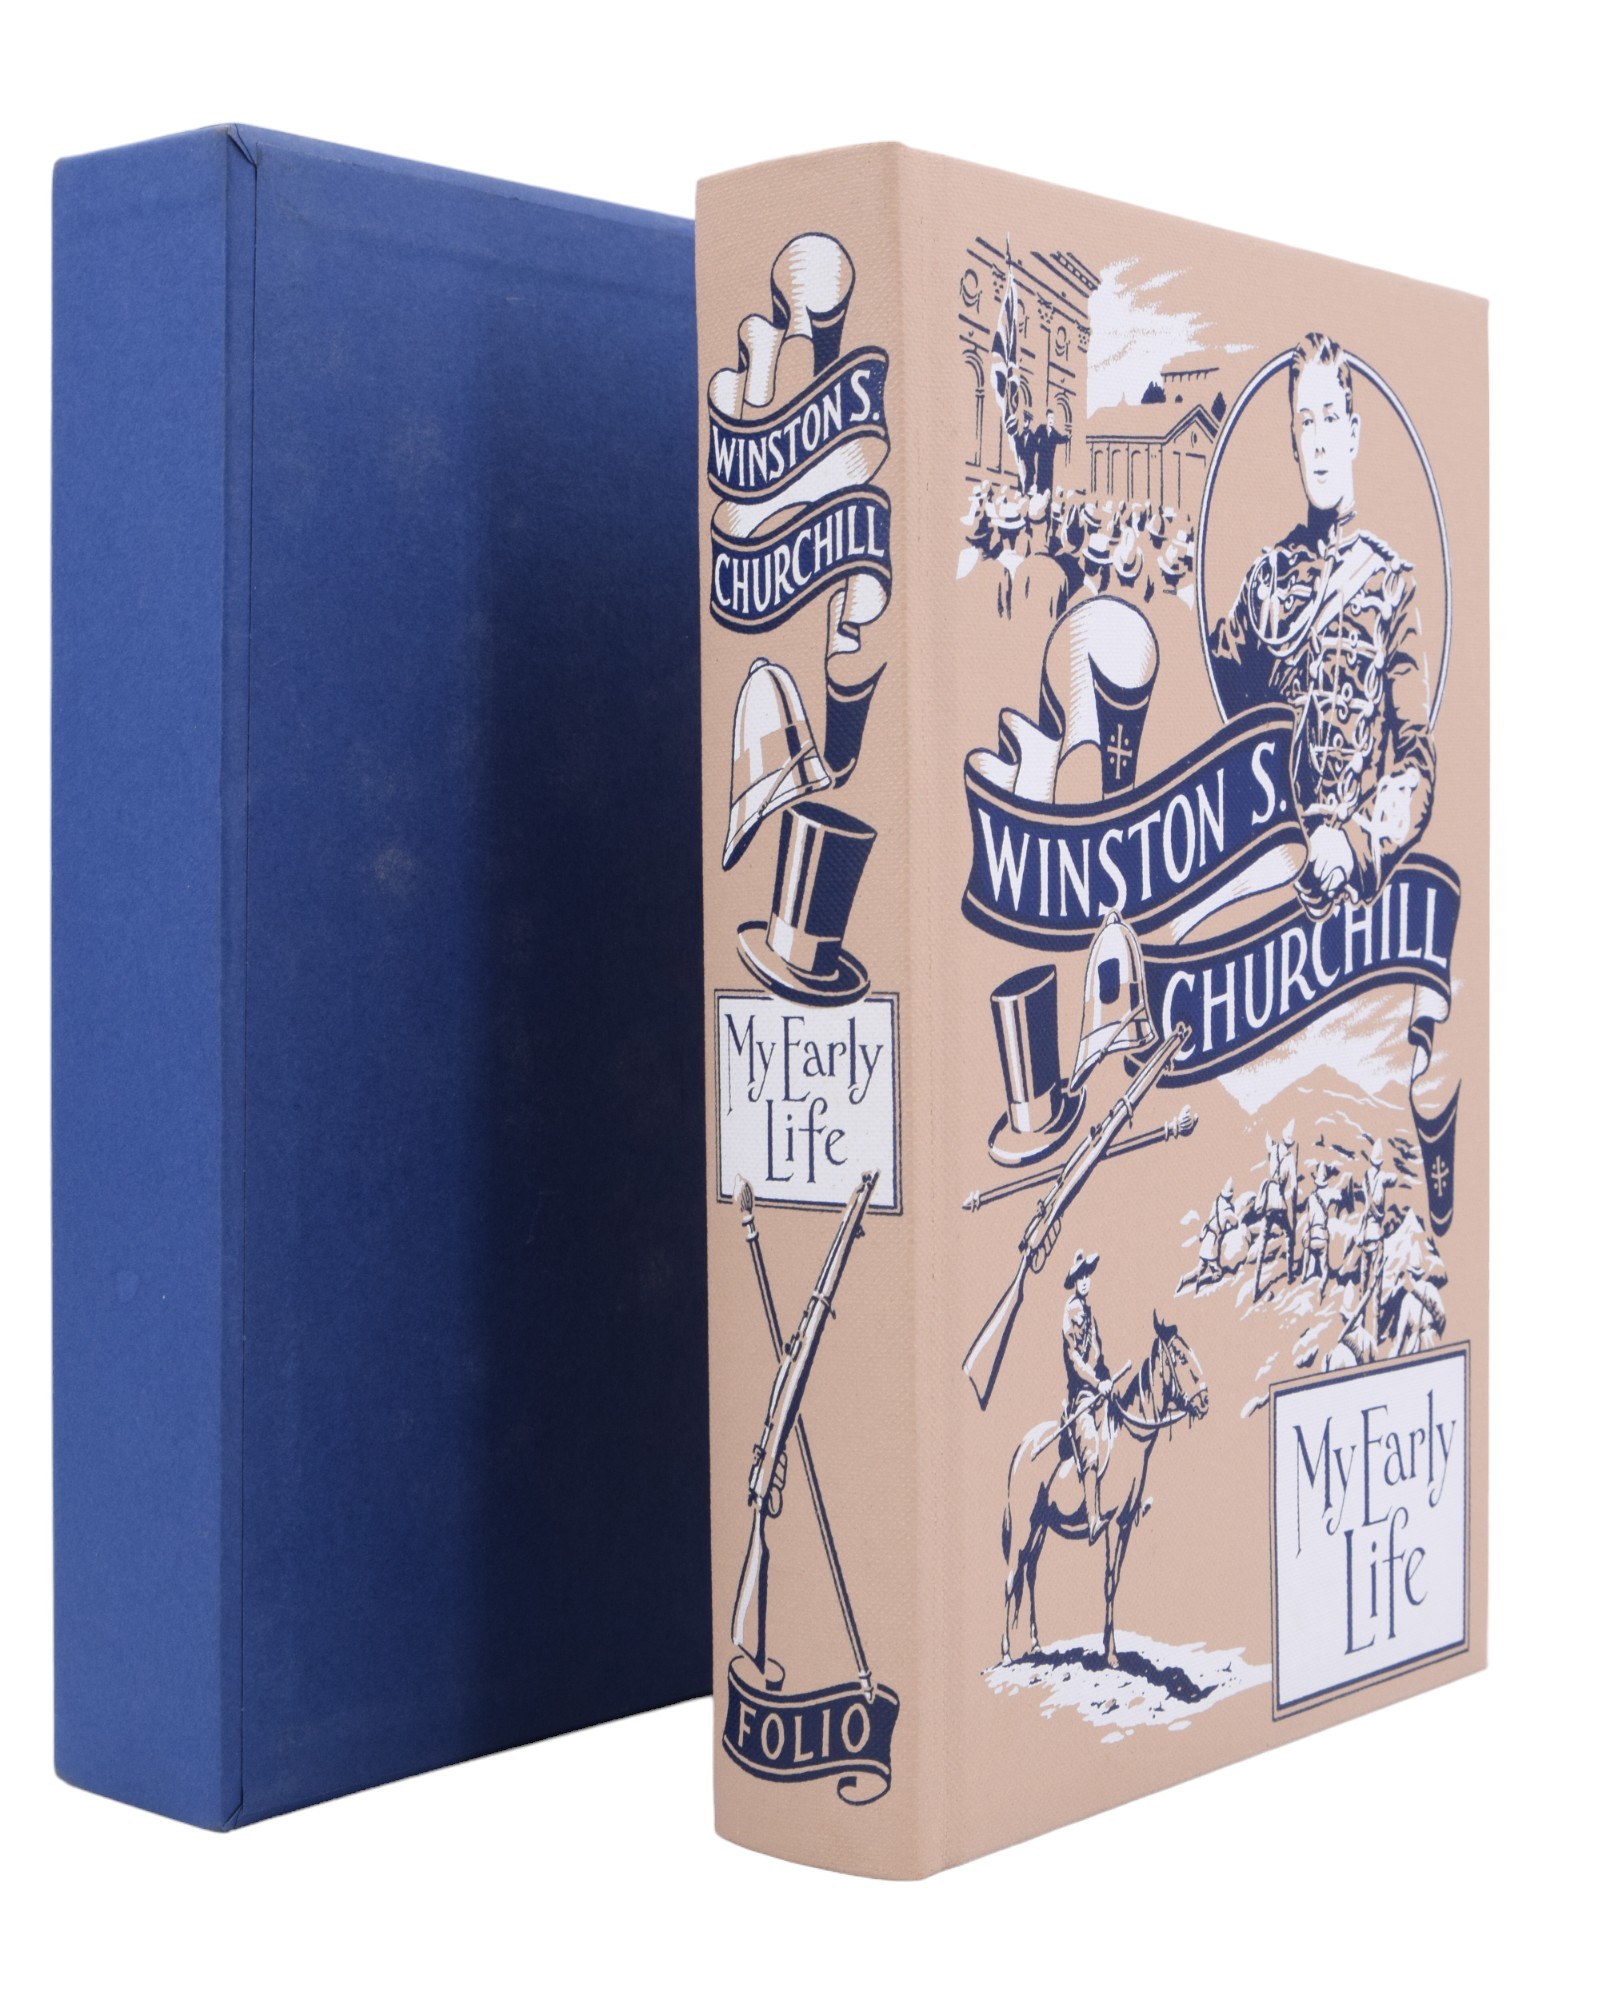 Seven Folio Society publications in slip cases, including Frances Wood, "The Silk Road", 2002; - Image 24 of 31